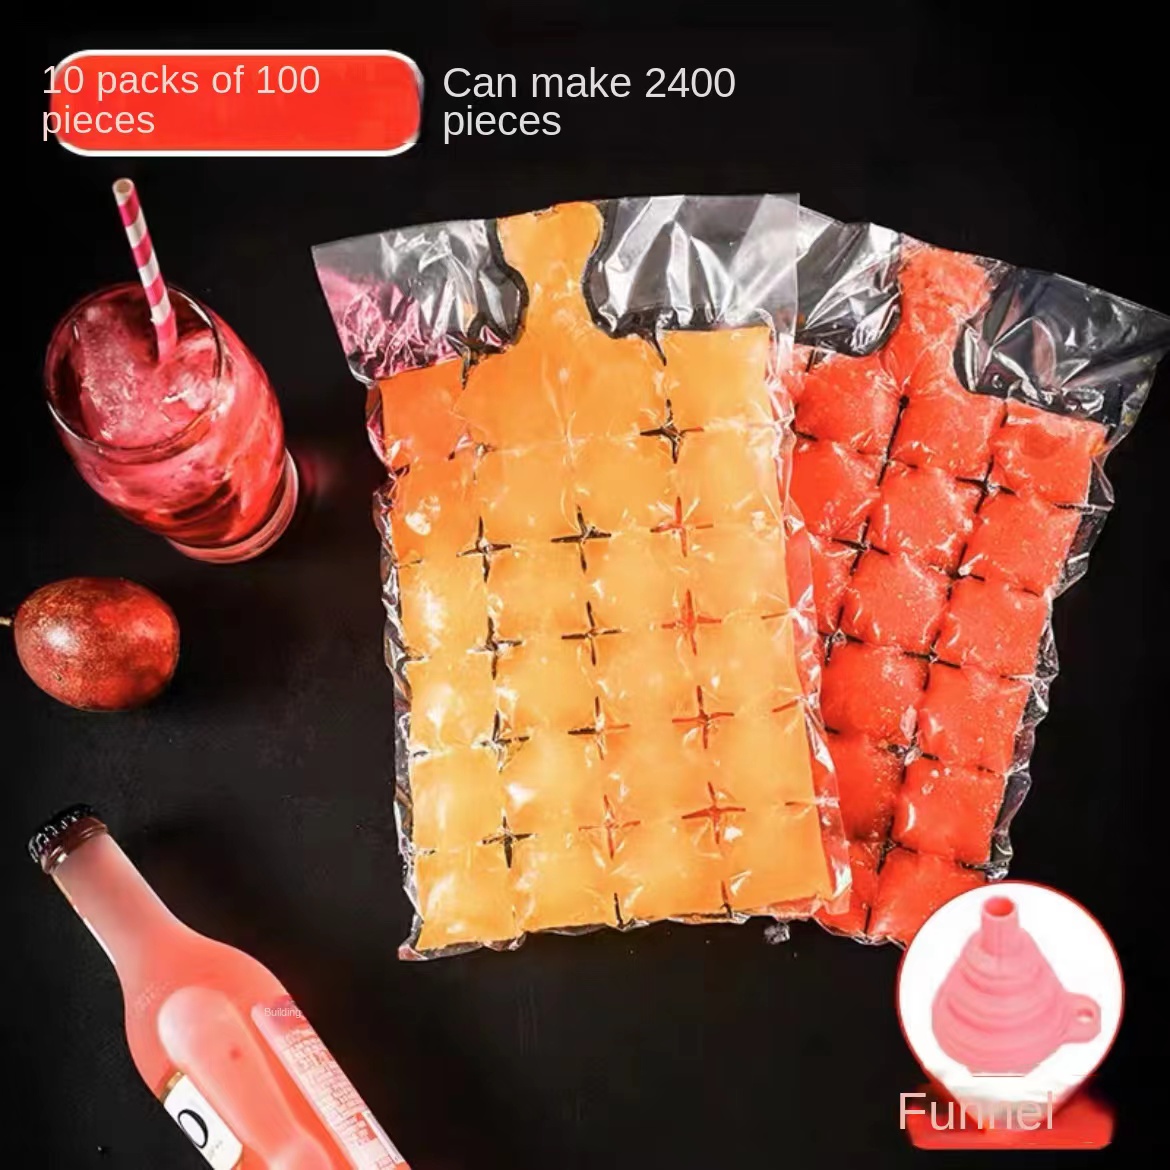 Disposable Ice Cube Bag 100 Pack (2400 Ice Cubes, 100 Bags): Ice Cube  Trays: Home & Kitchen 